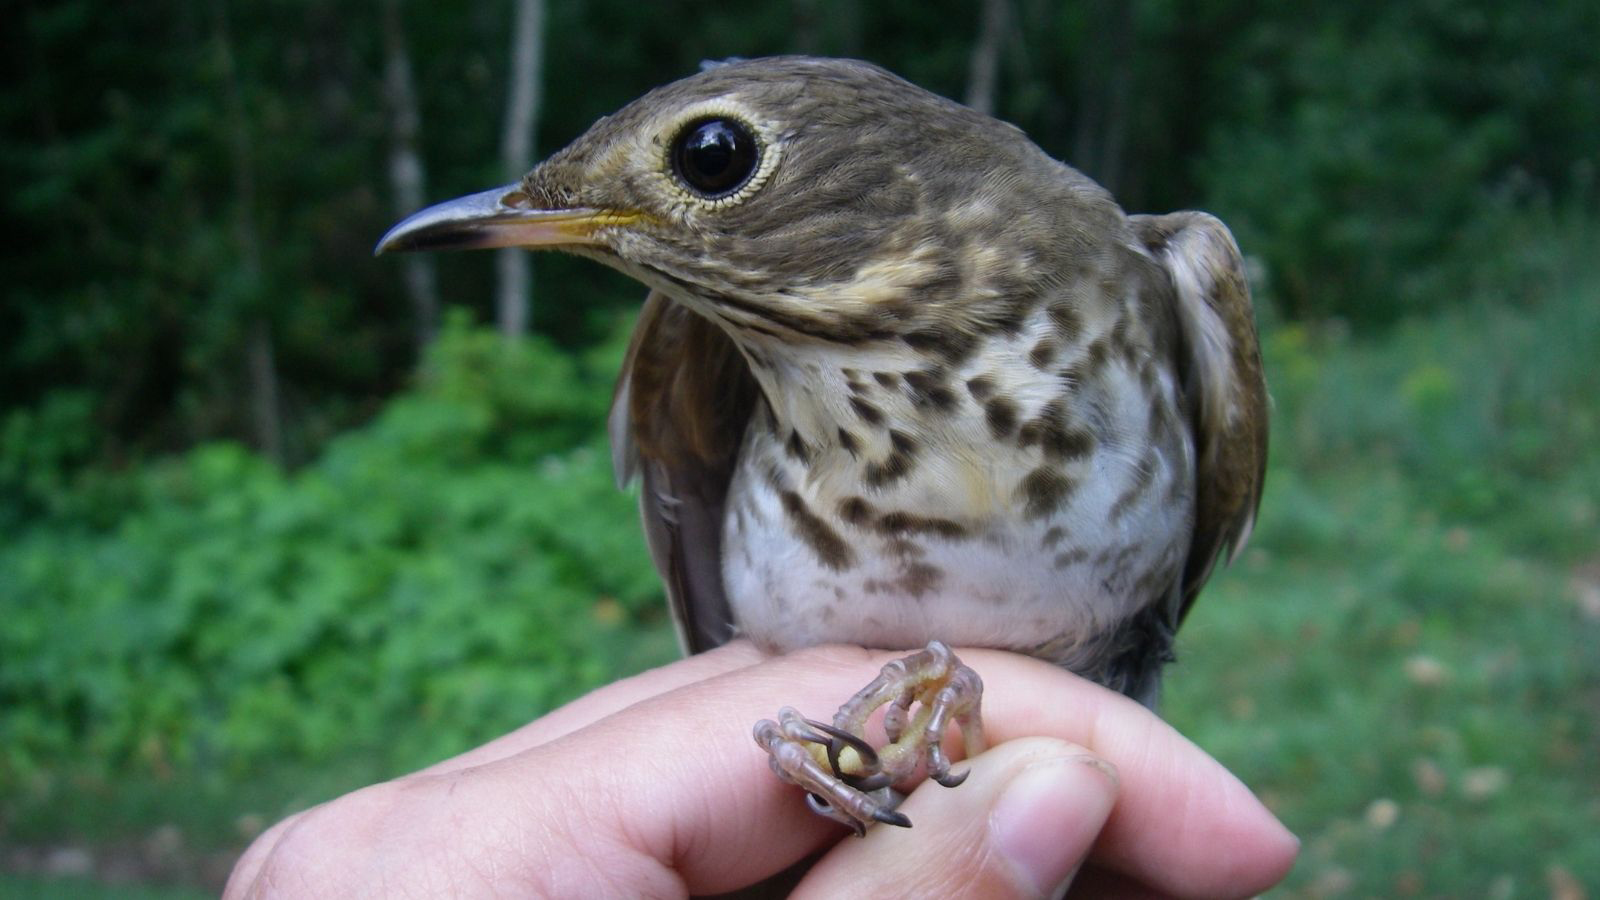 A Swainson's thrush, one of the birds studied by Texas A&M biologist Kira Delmore